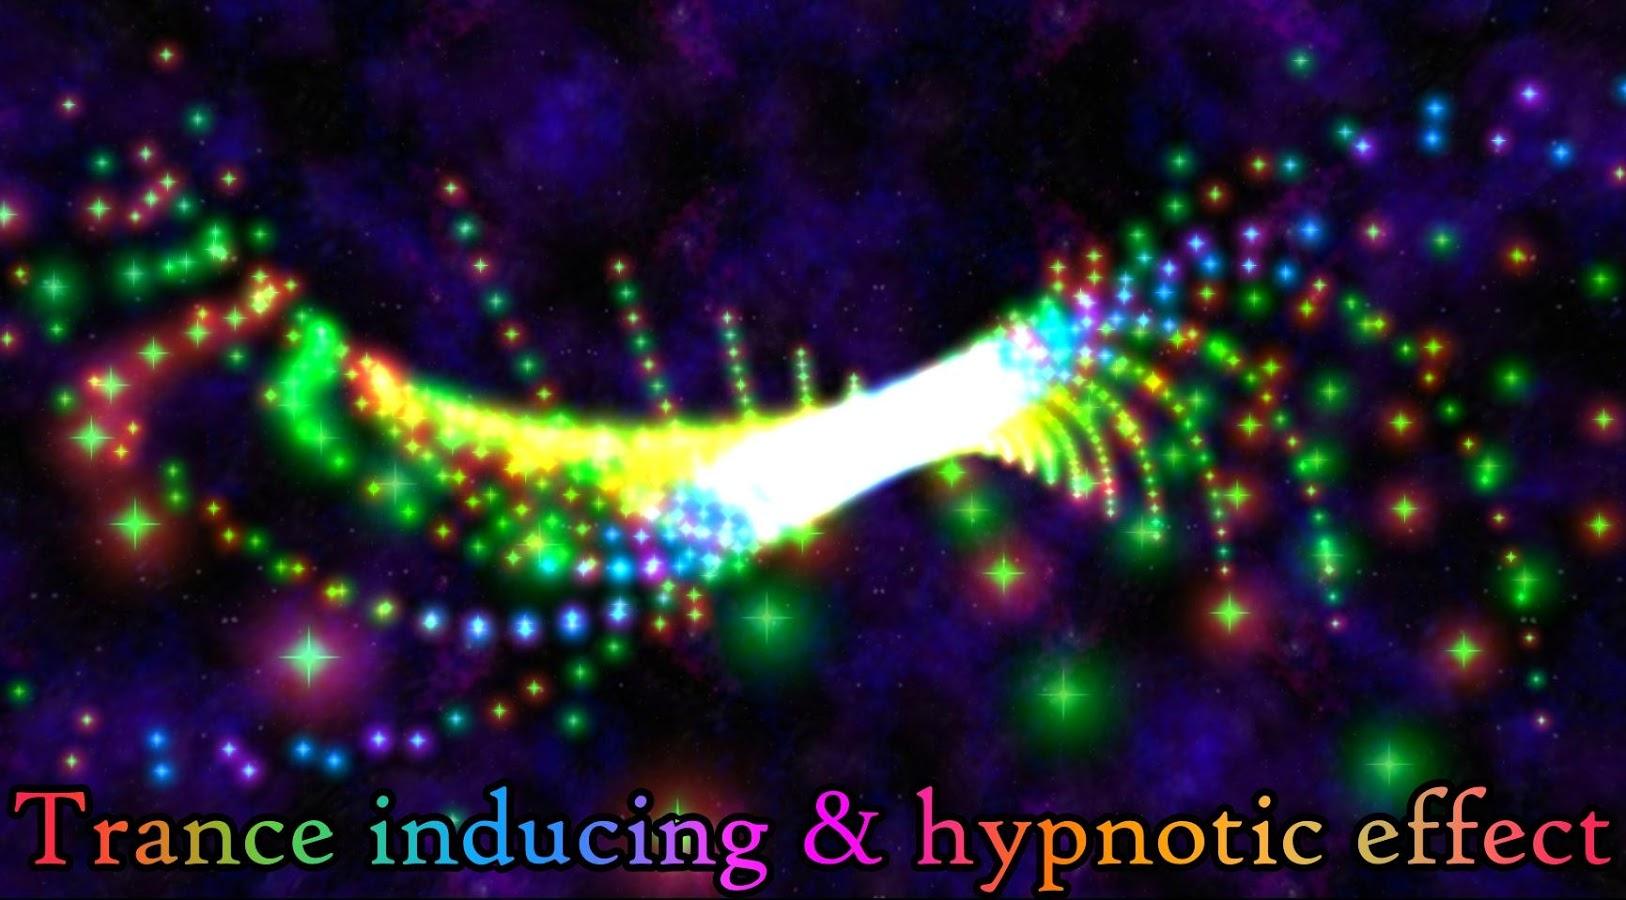 Morphing Galaxy Music visualizer & Live Wallpaper 2.23 APK Download